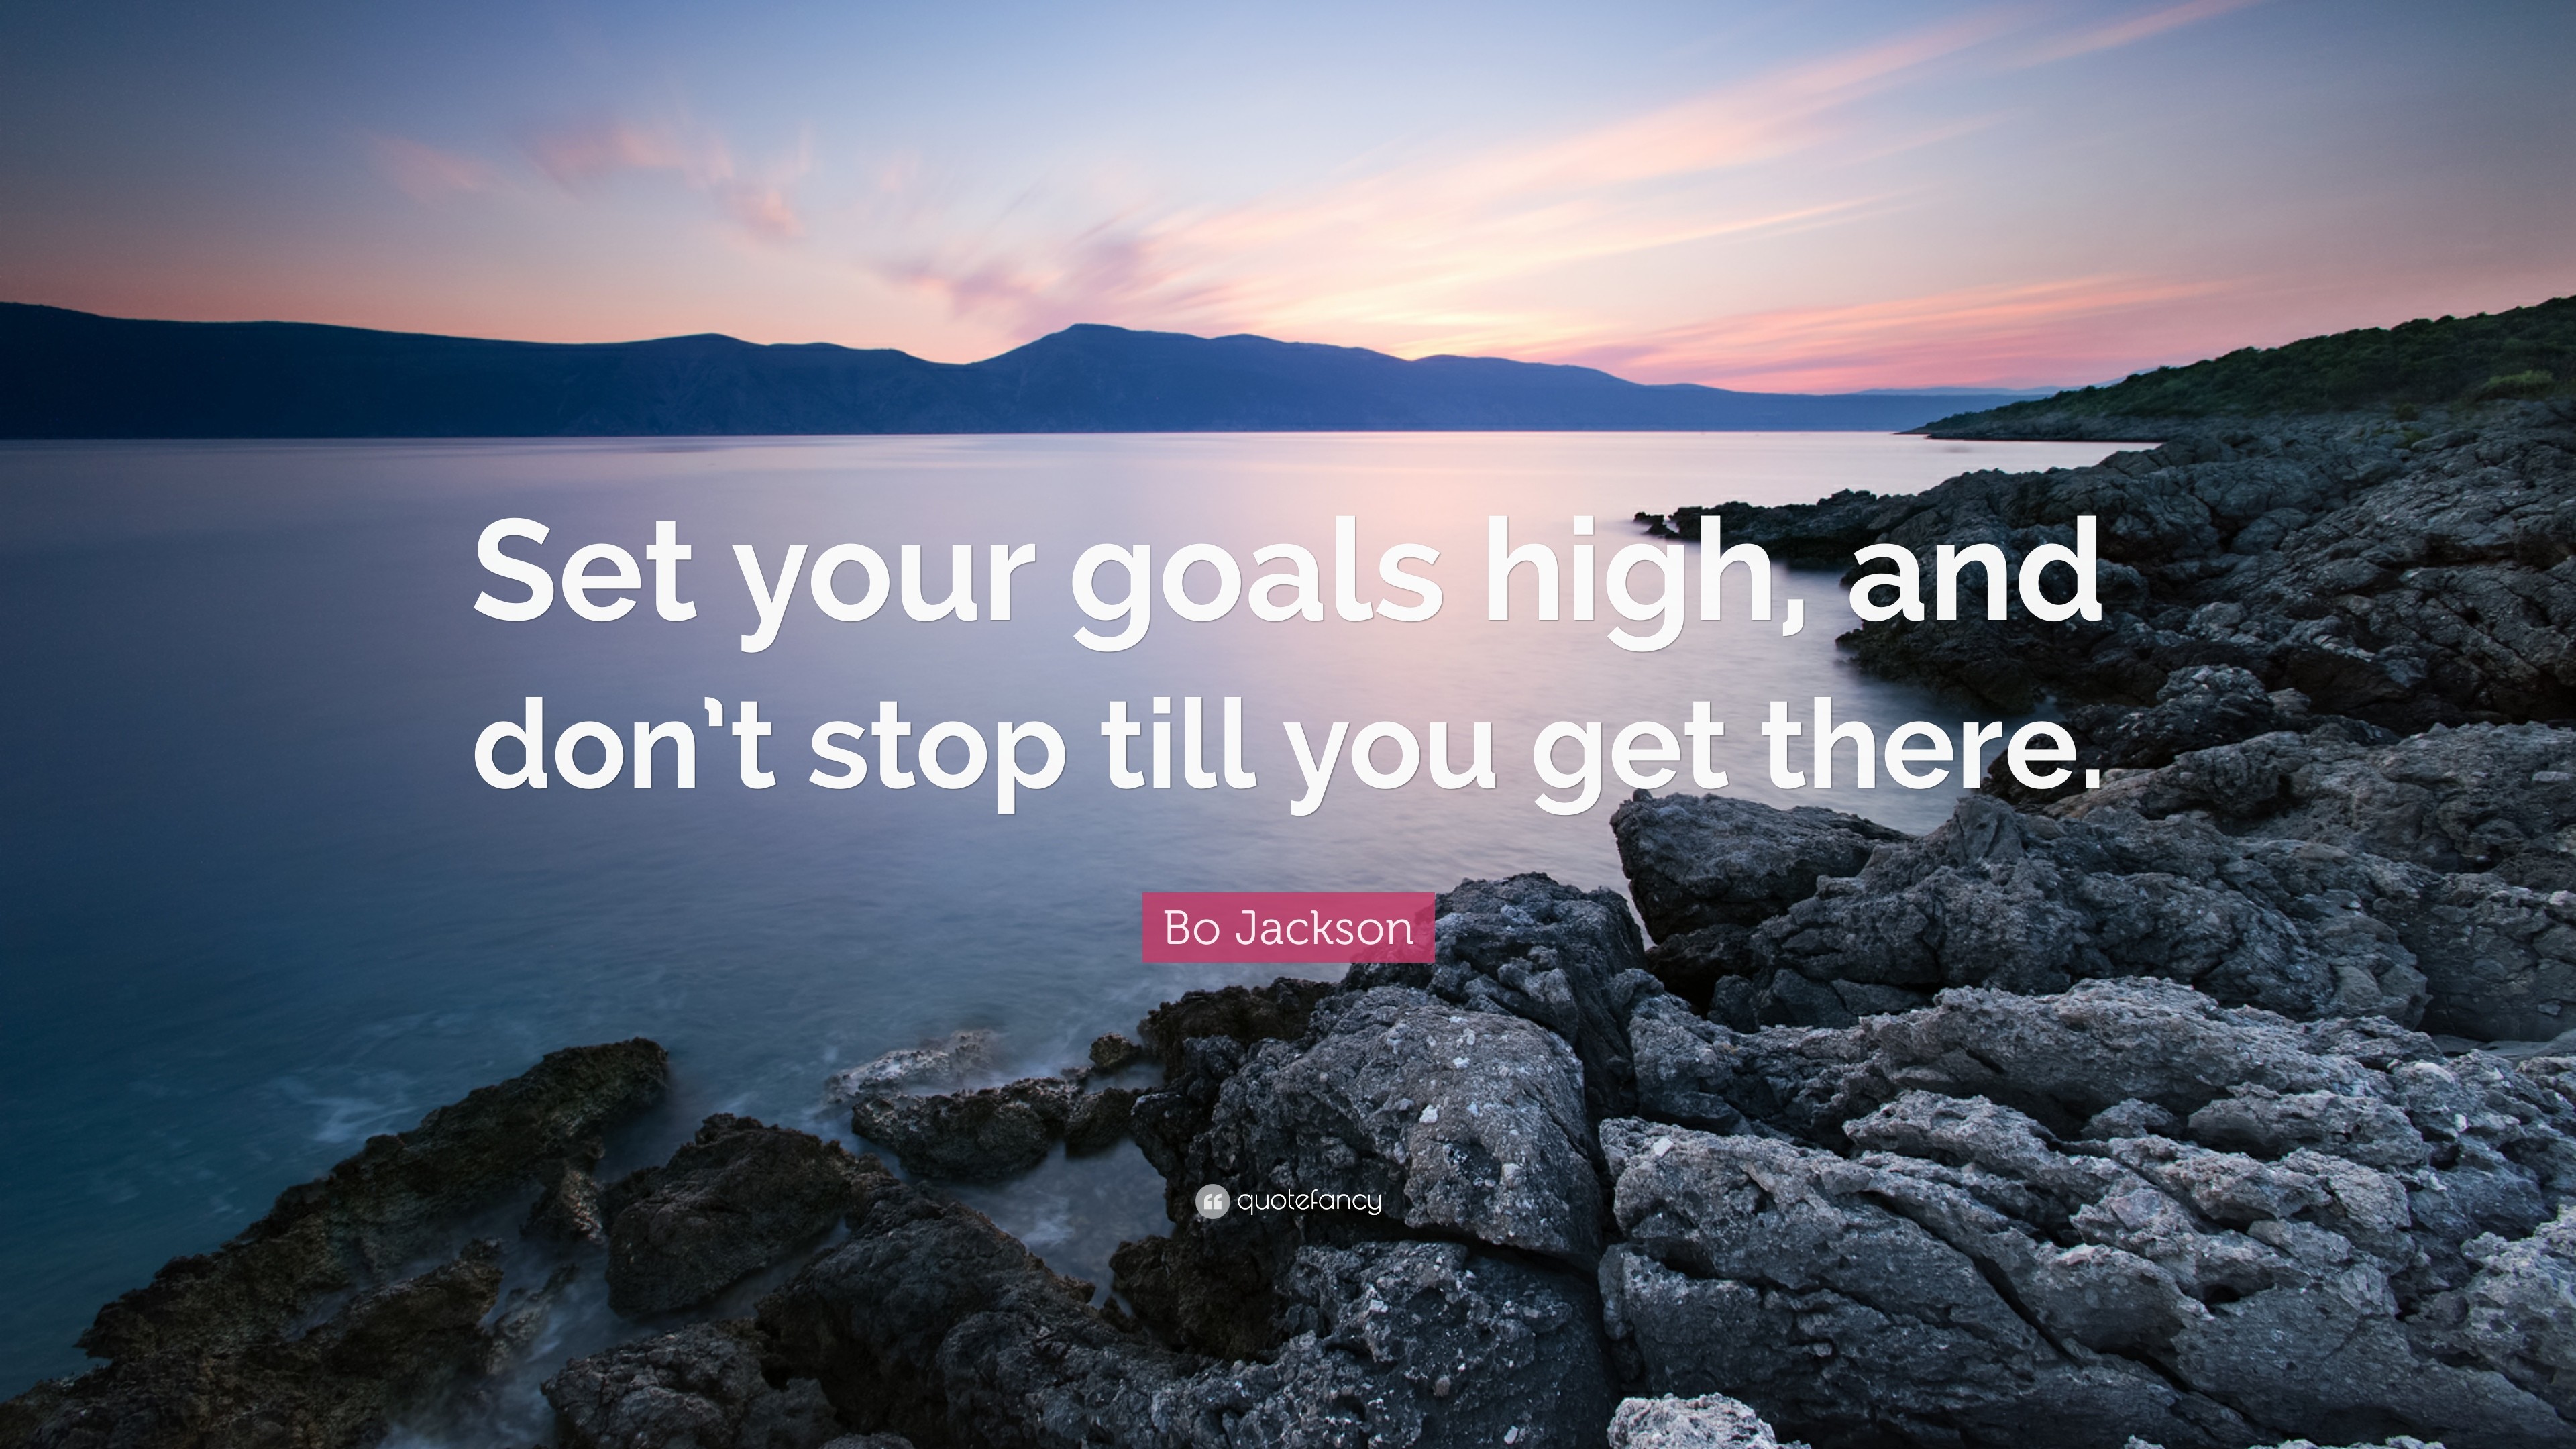 Bo Jackson Quote: “Set your goals high, and don't stop till